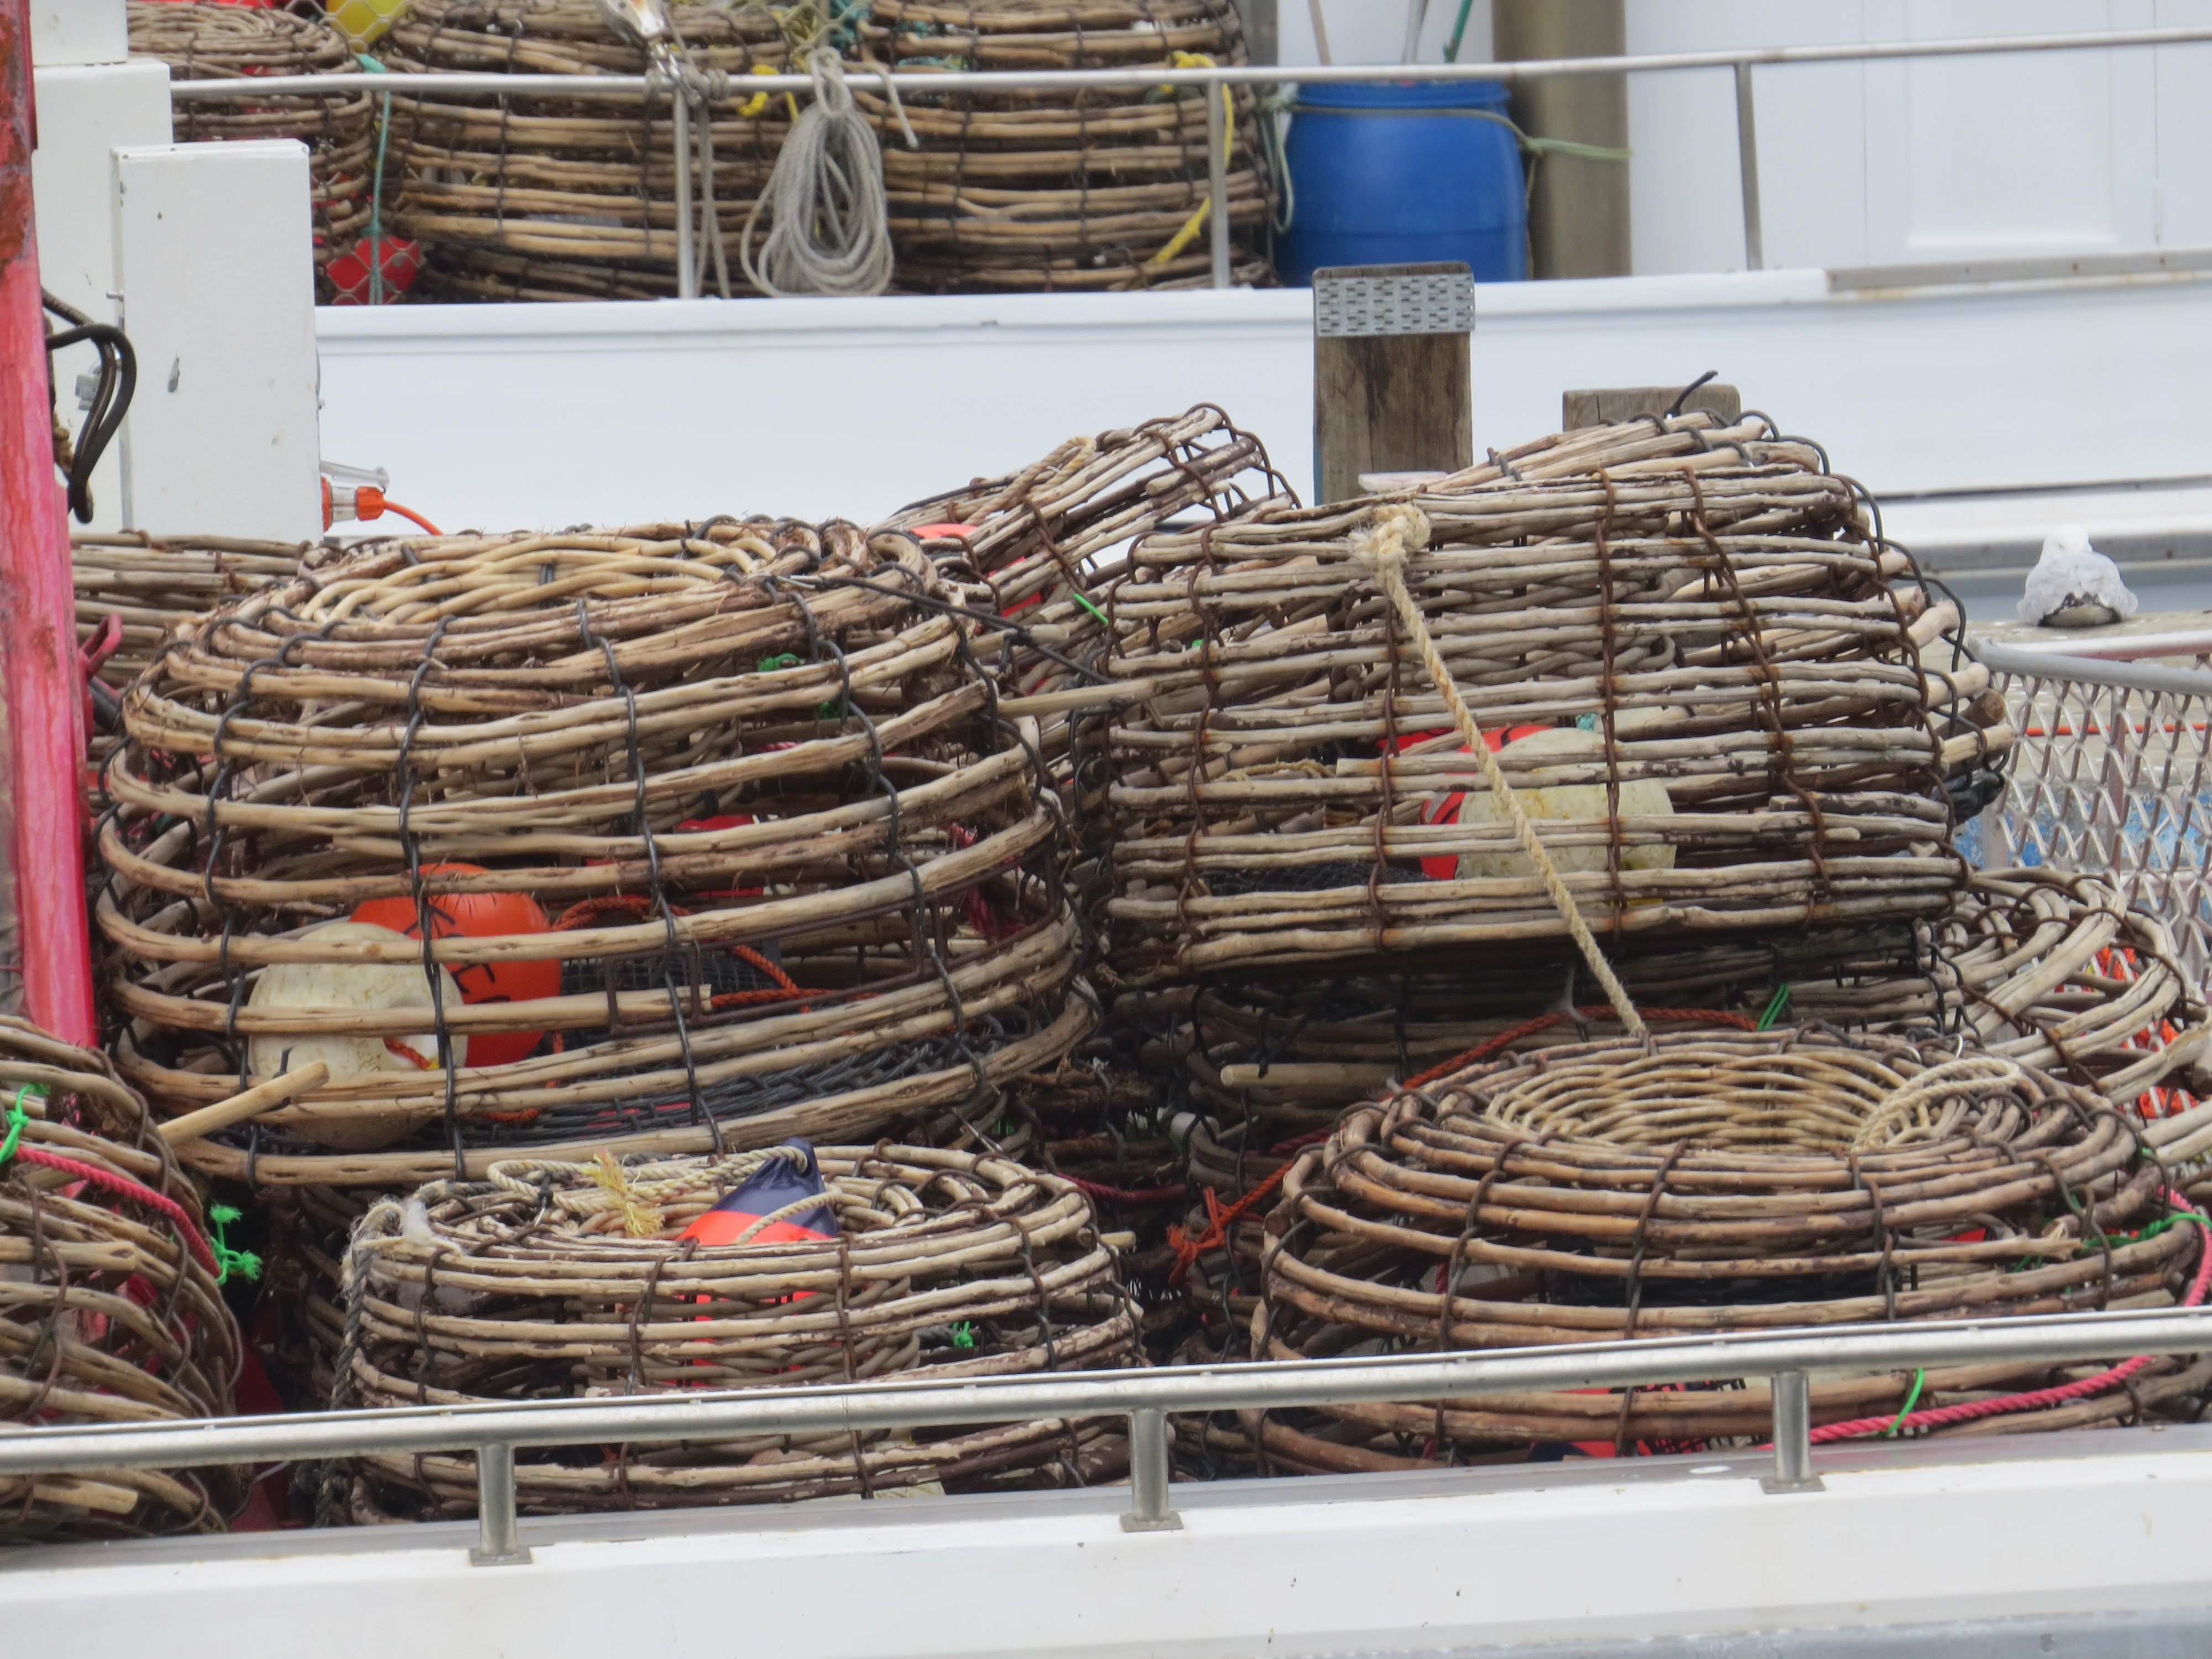 50--like lobster pots but round